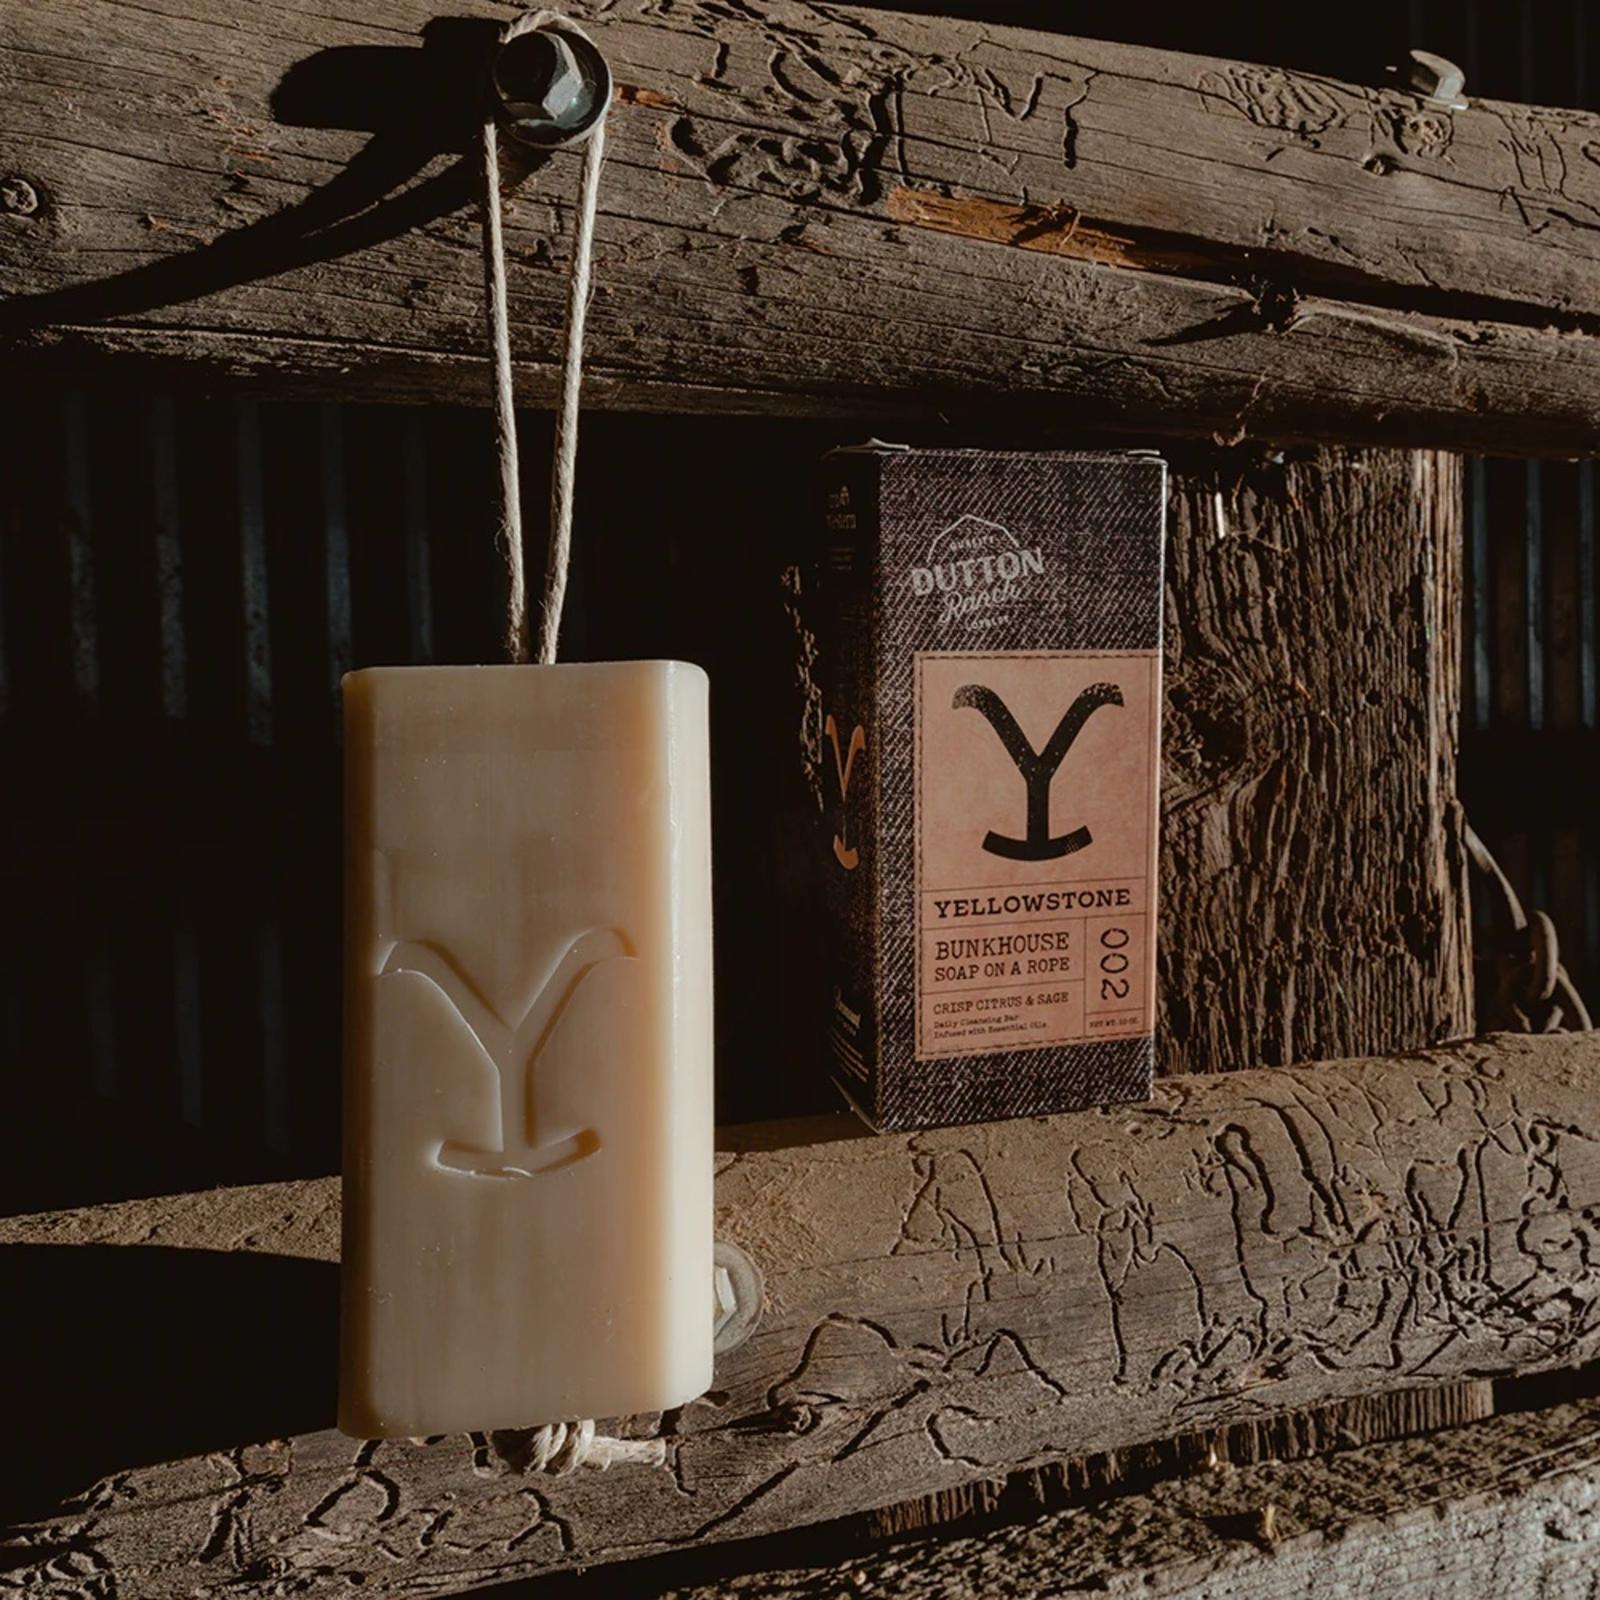 Tru Western Yellowstone Bunkhouse Soap on a Rope